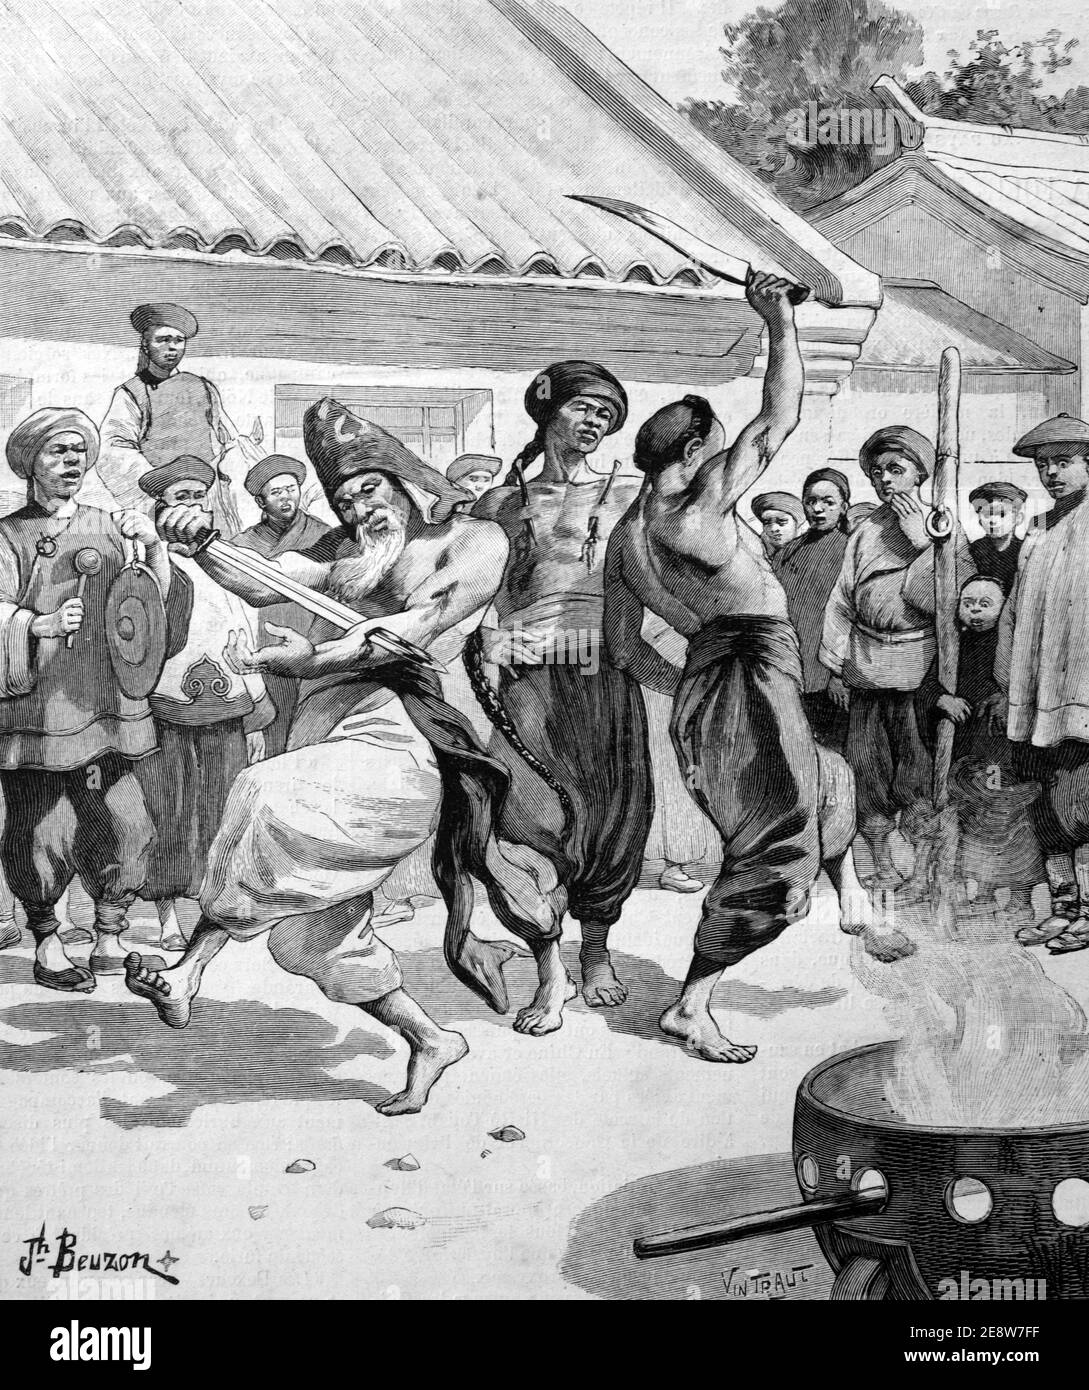 Chinese Boxer Fanatics or Penitents Demonstrate During the Boxer Rebellion, Boxer Uprising or Yihetuan Movement (1899-1901) China 1901 Vintage Illustration or Engraving Stock Photo